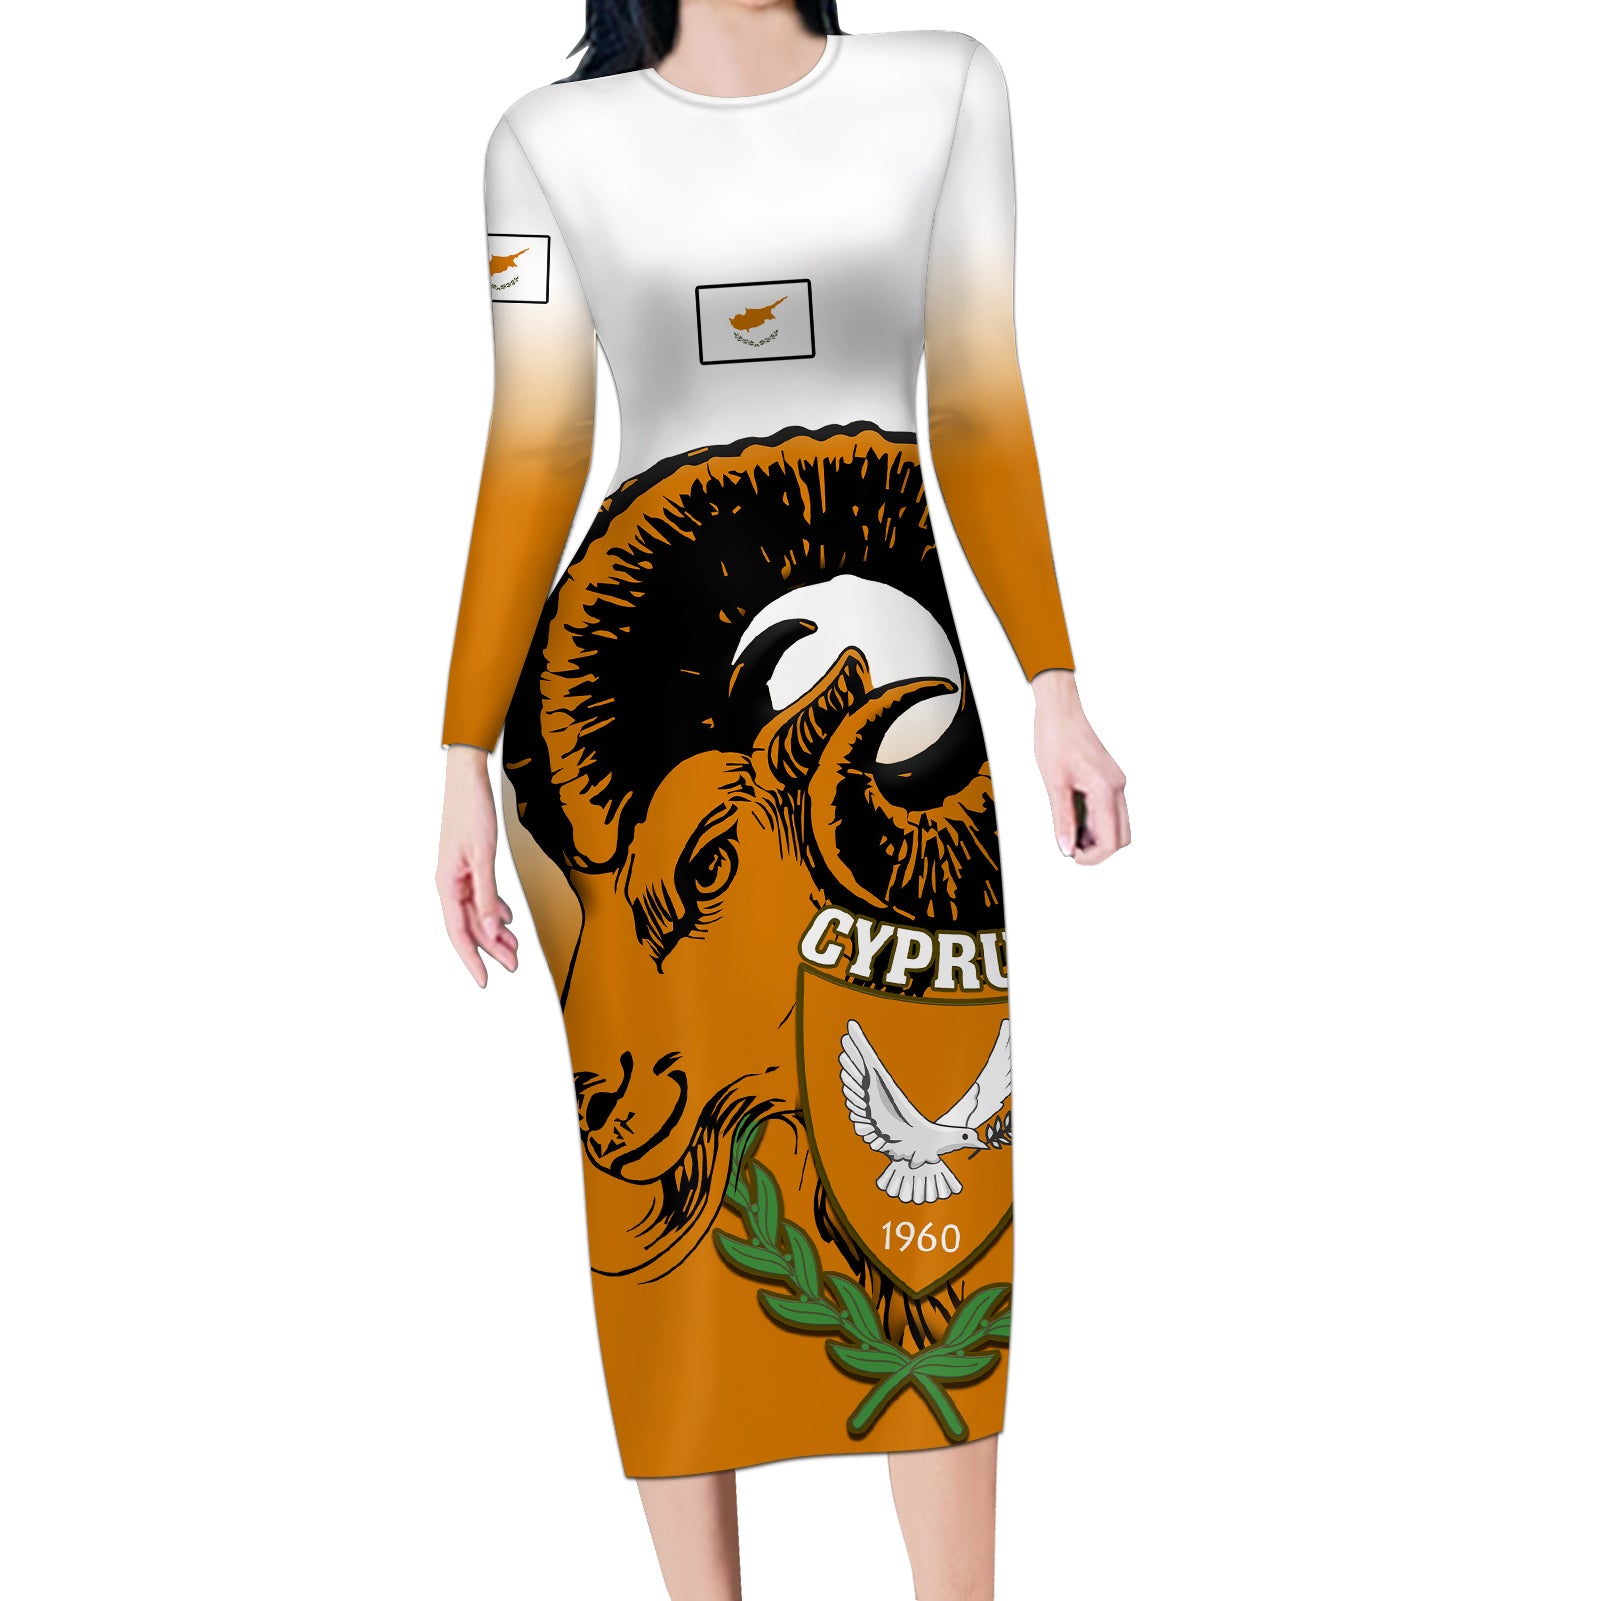 cyprus-independence-day-long-sleeve-bodycon-dress-coat-of-arms-with-cypriot-mouflon-gradient-style